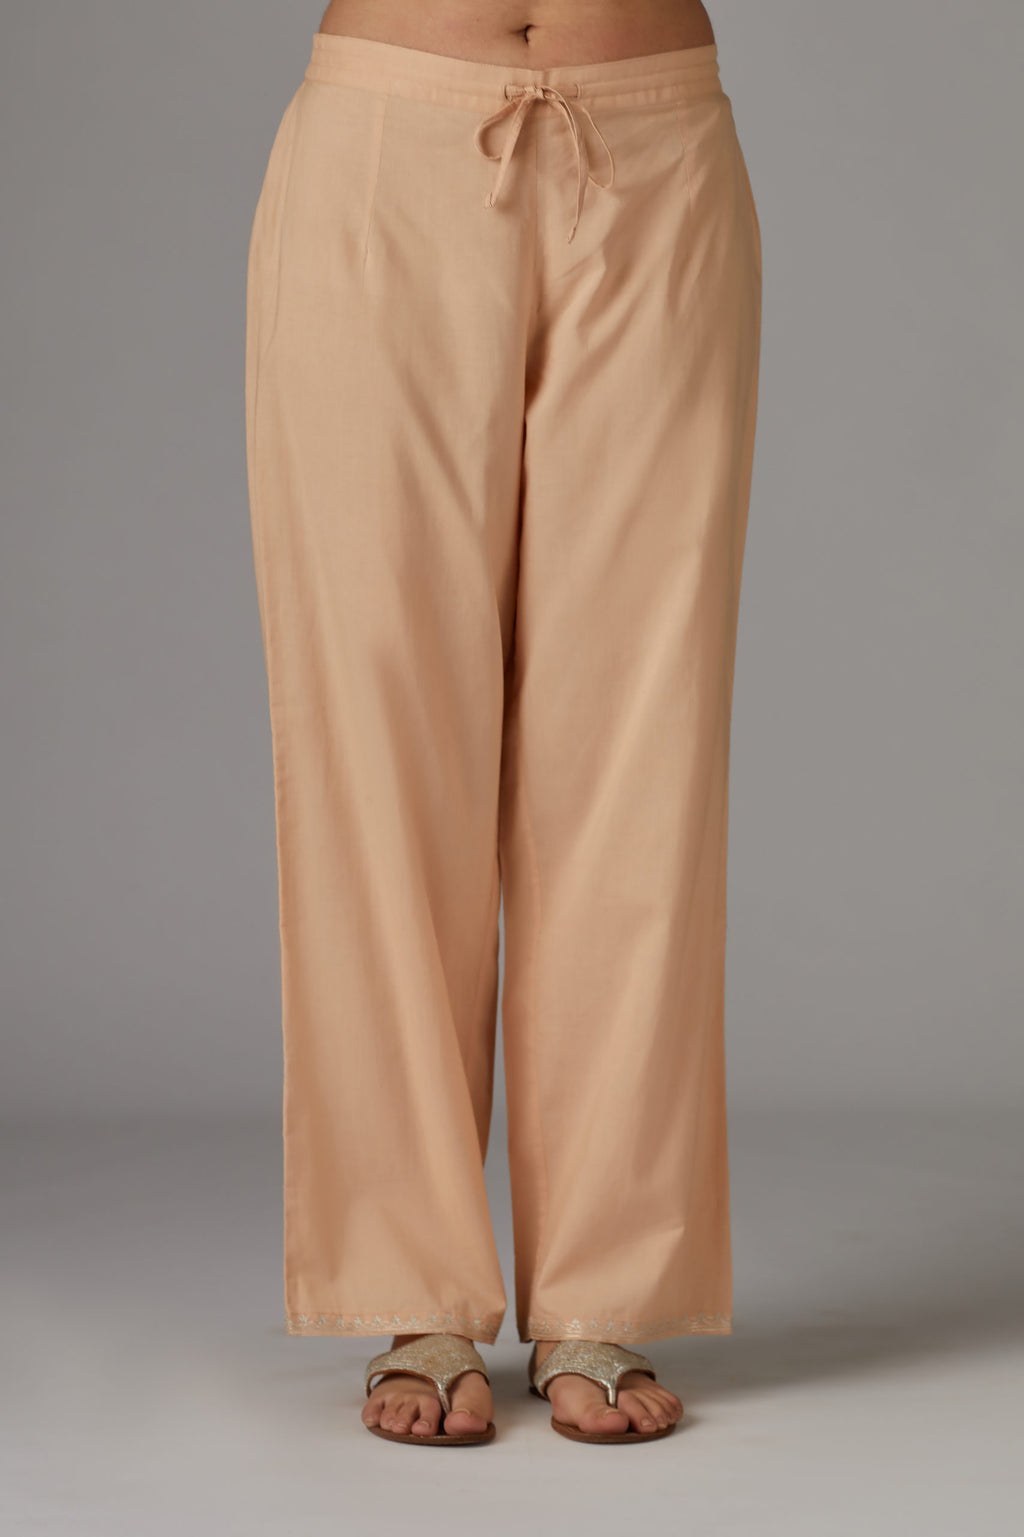 Peach cotton straight pants with aari embroidery at hem